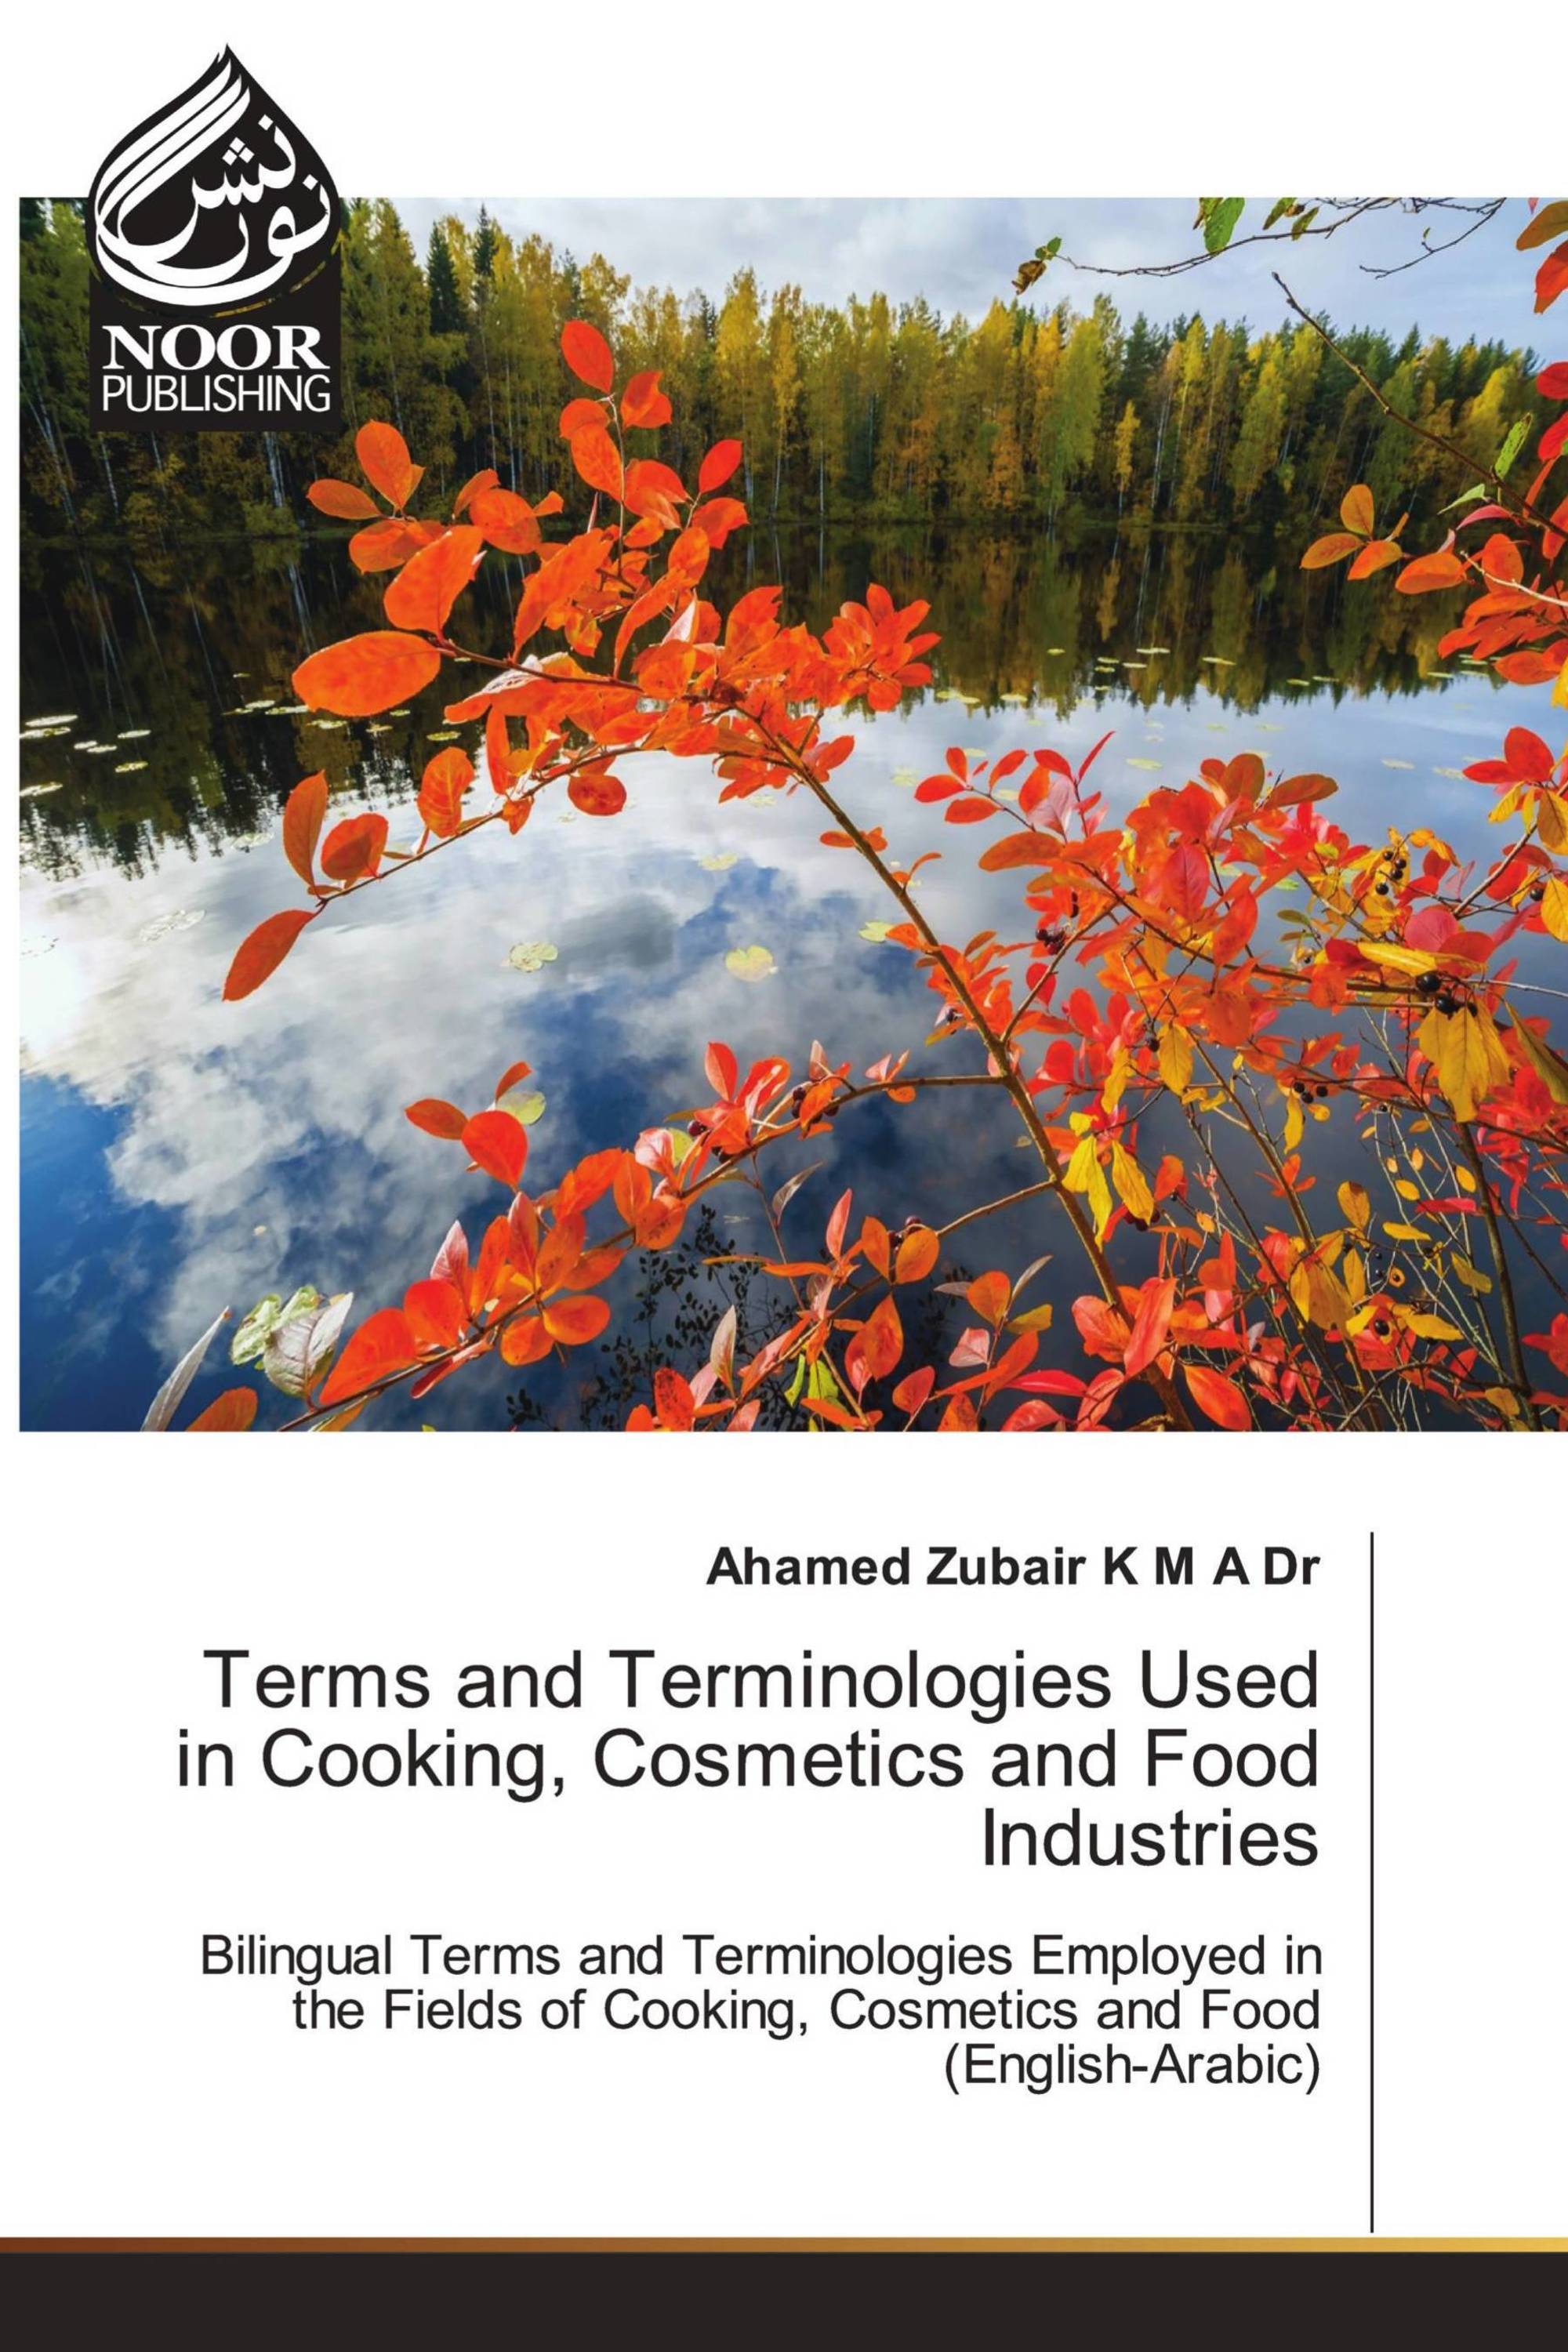 Terms and Terminologies Used in Cooking, Cosmetics and Food Industries